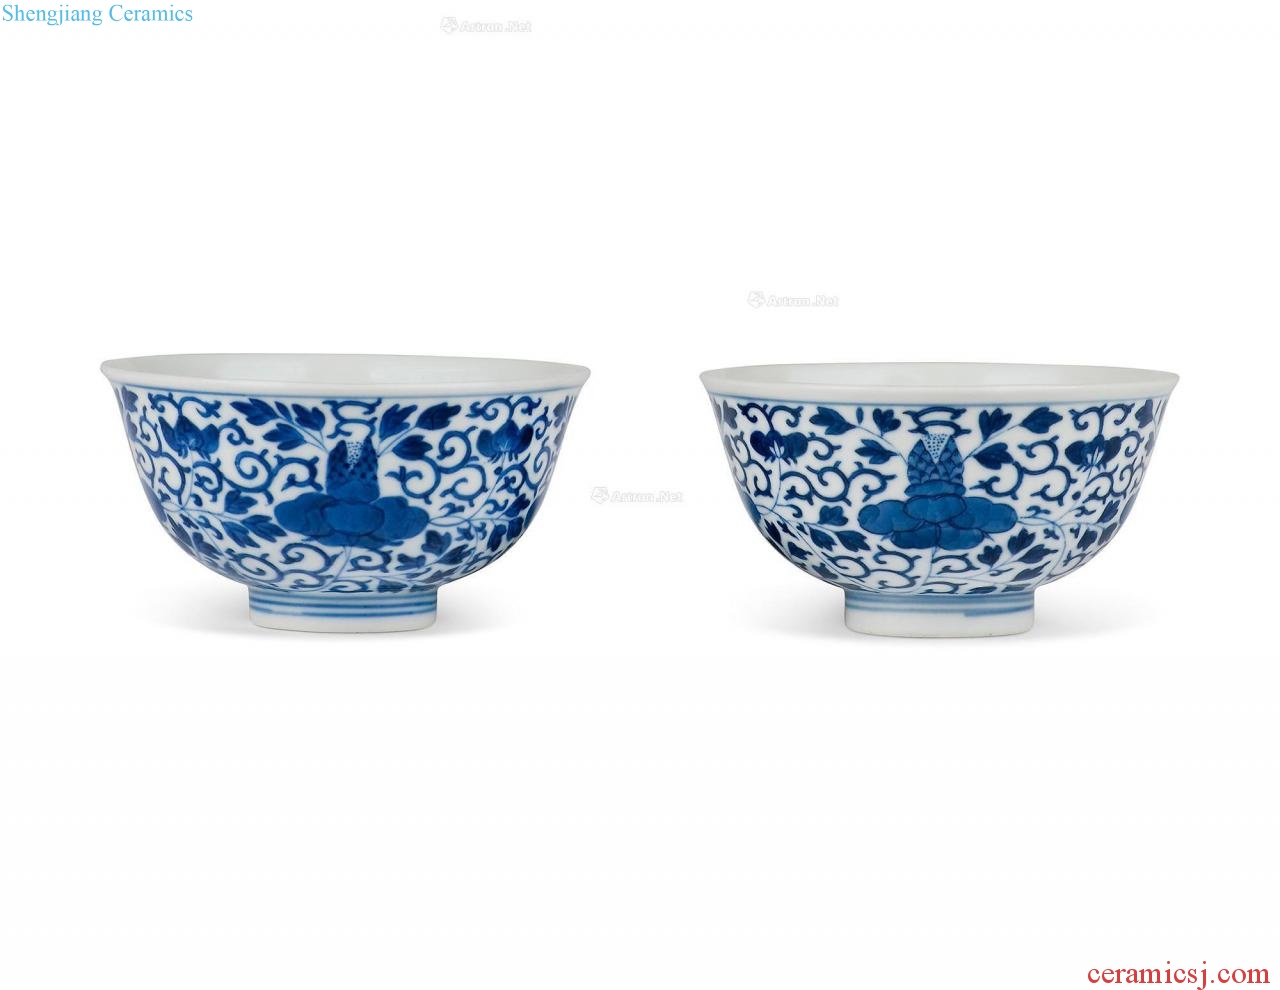 Qing guangxu Blue and white flowers green-splashed bowls (a)